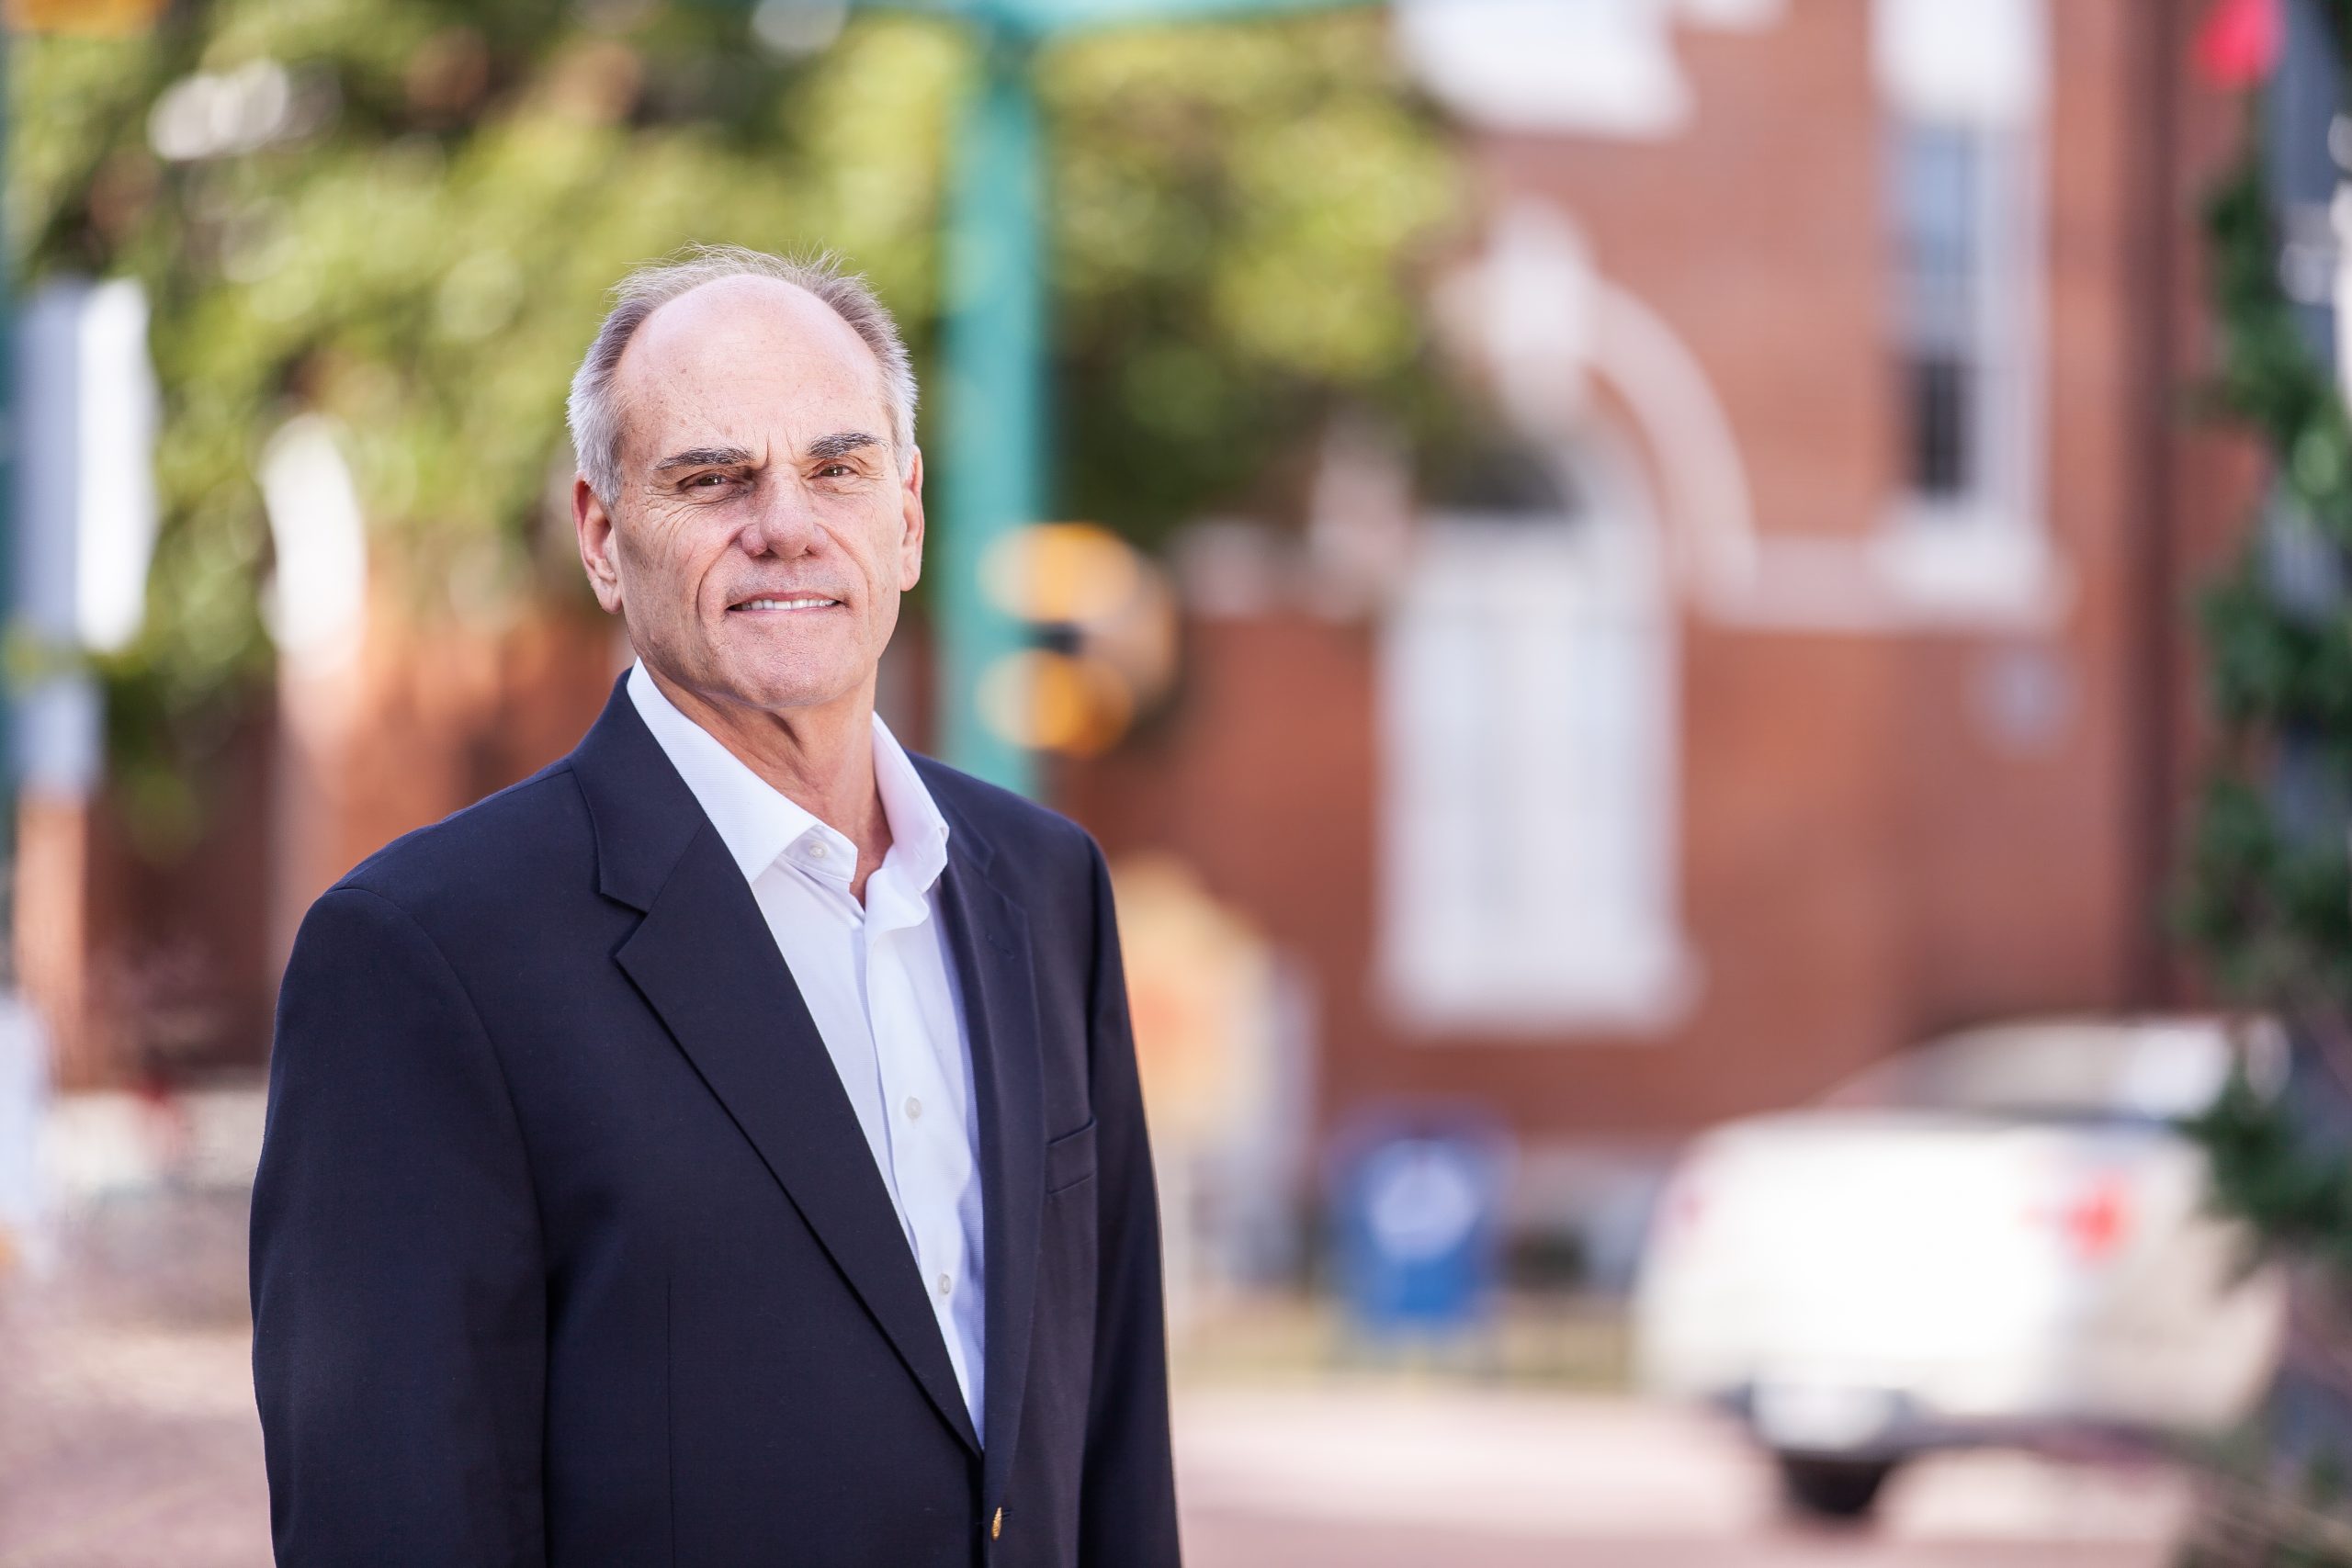 Joe Campbell Announces Campaign for GA State House, District 171